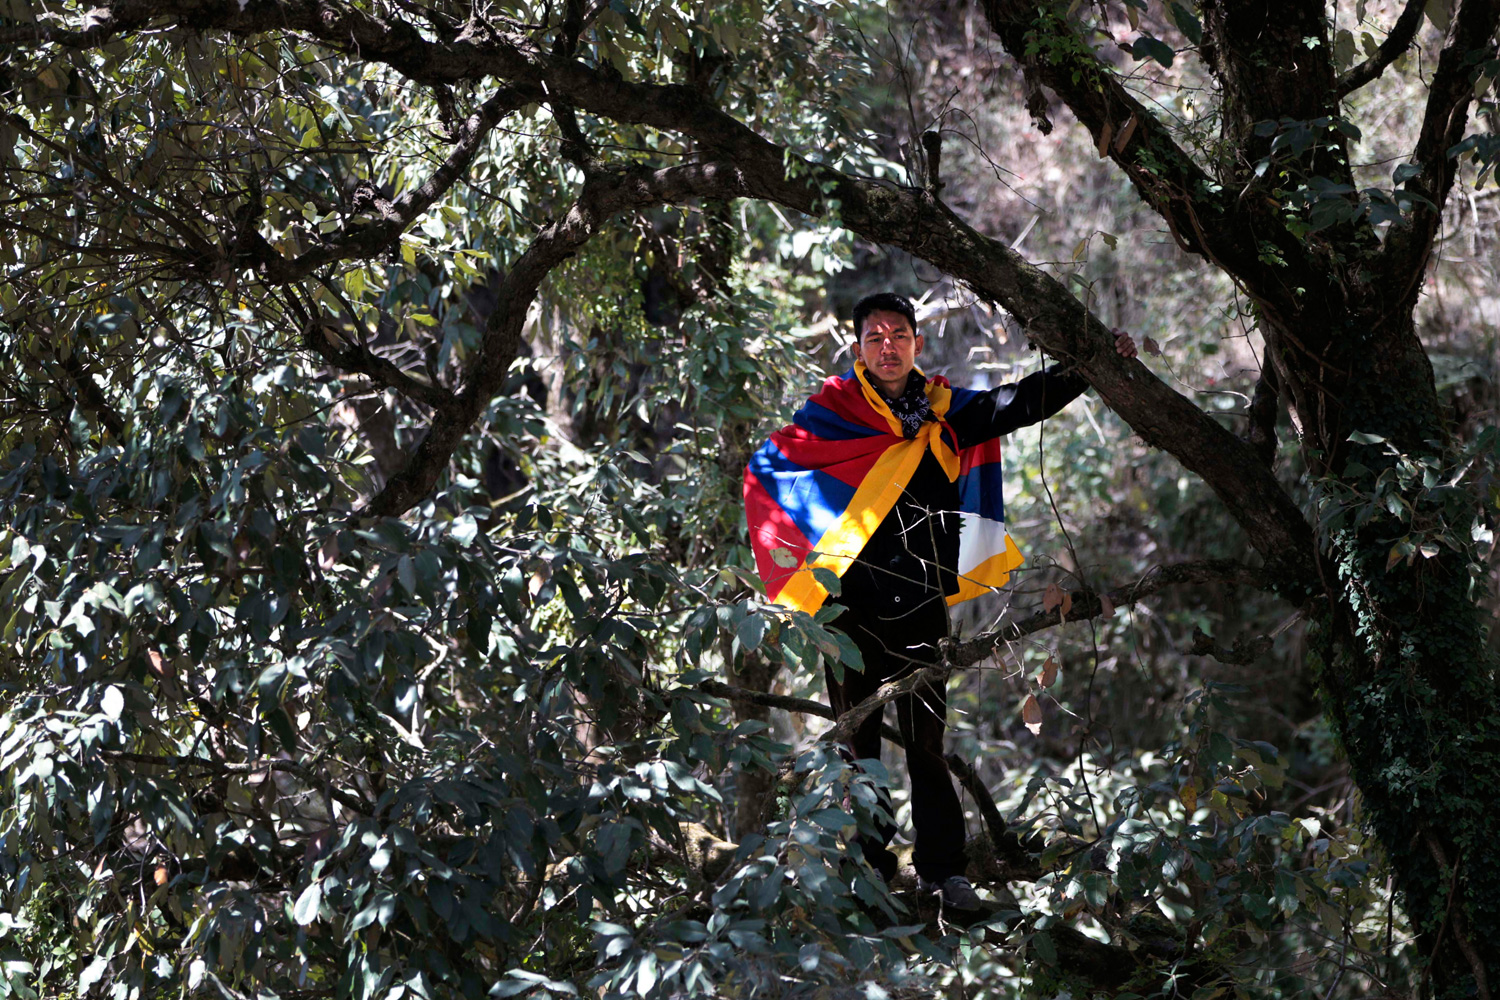 March 30, 2012. A Tibetan exile wrapped in the Tibetan flag climbs a tree to watch the final rite ceremony of 27-year-old Jamphel Yeshi in Dharamsala, India.